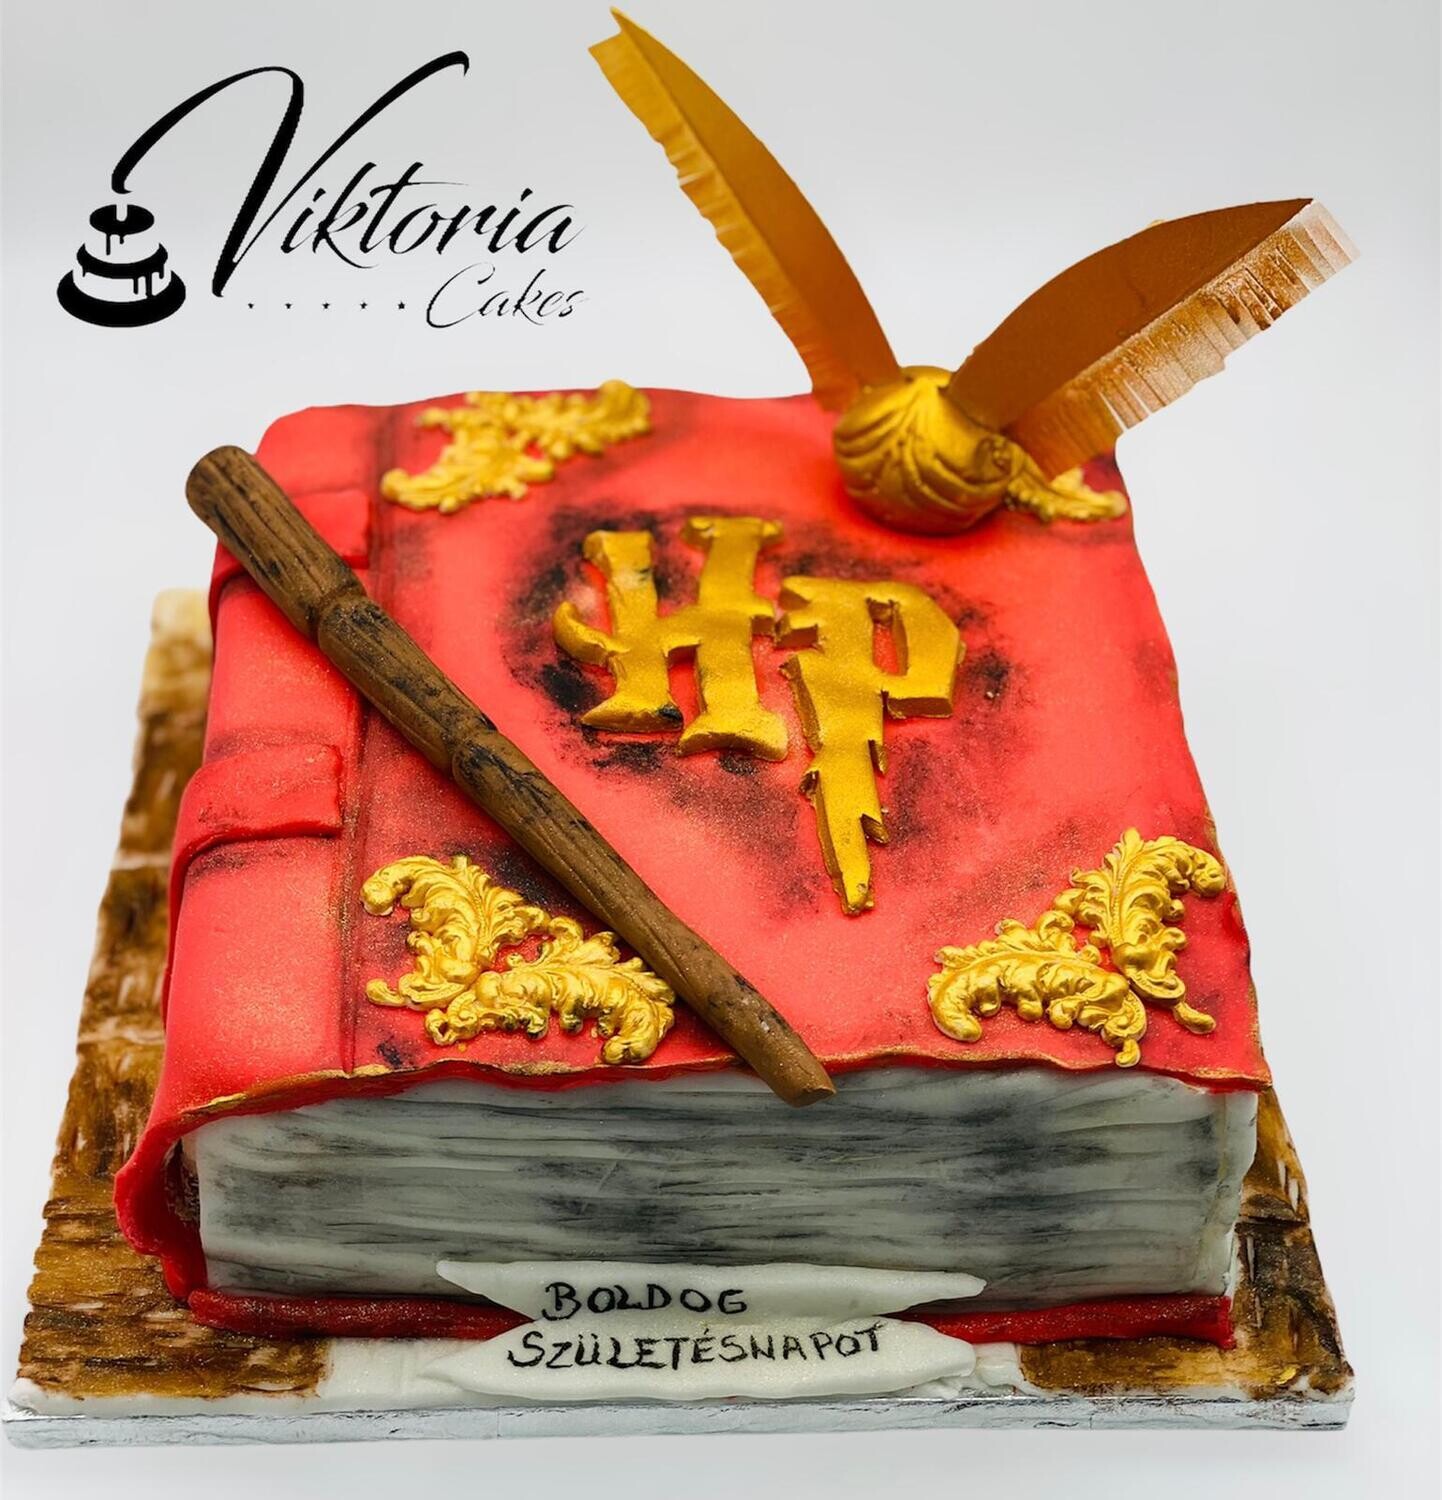 Harry Potter Birthday Cakes Photos and Images | Shutterstock-happymobile.vn